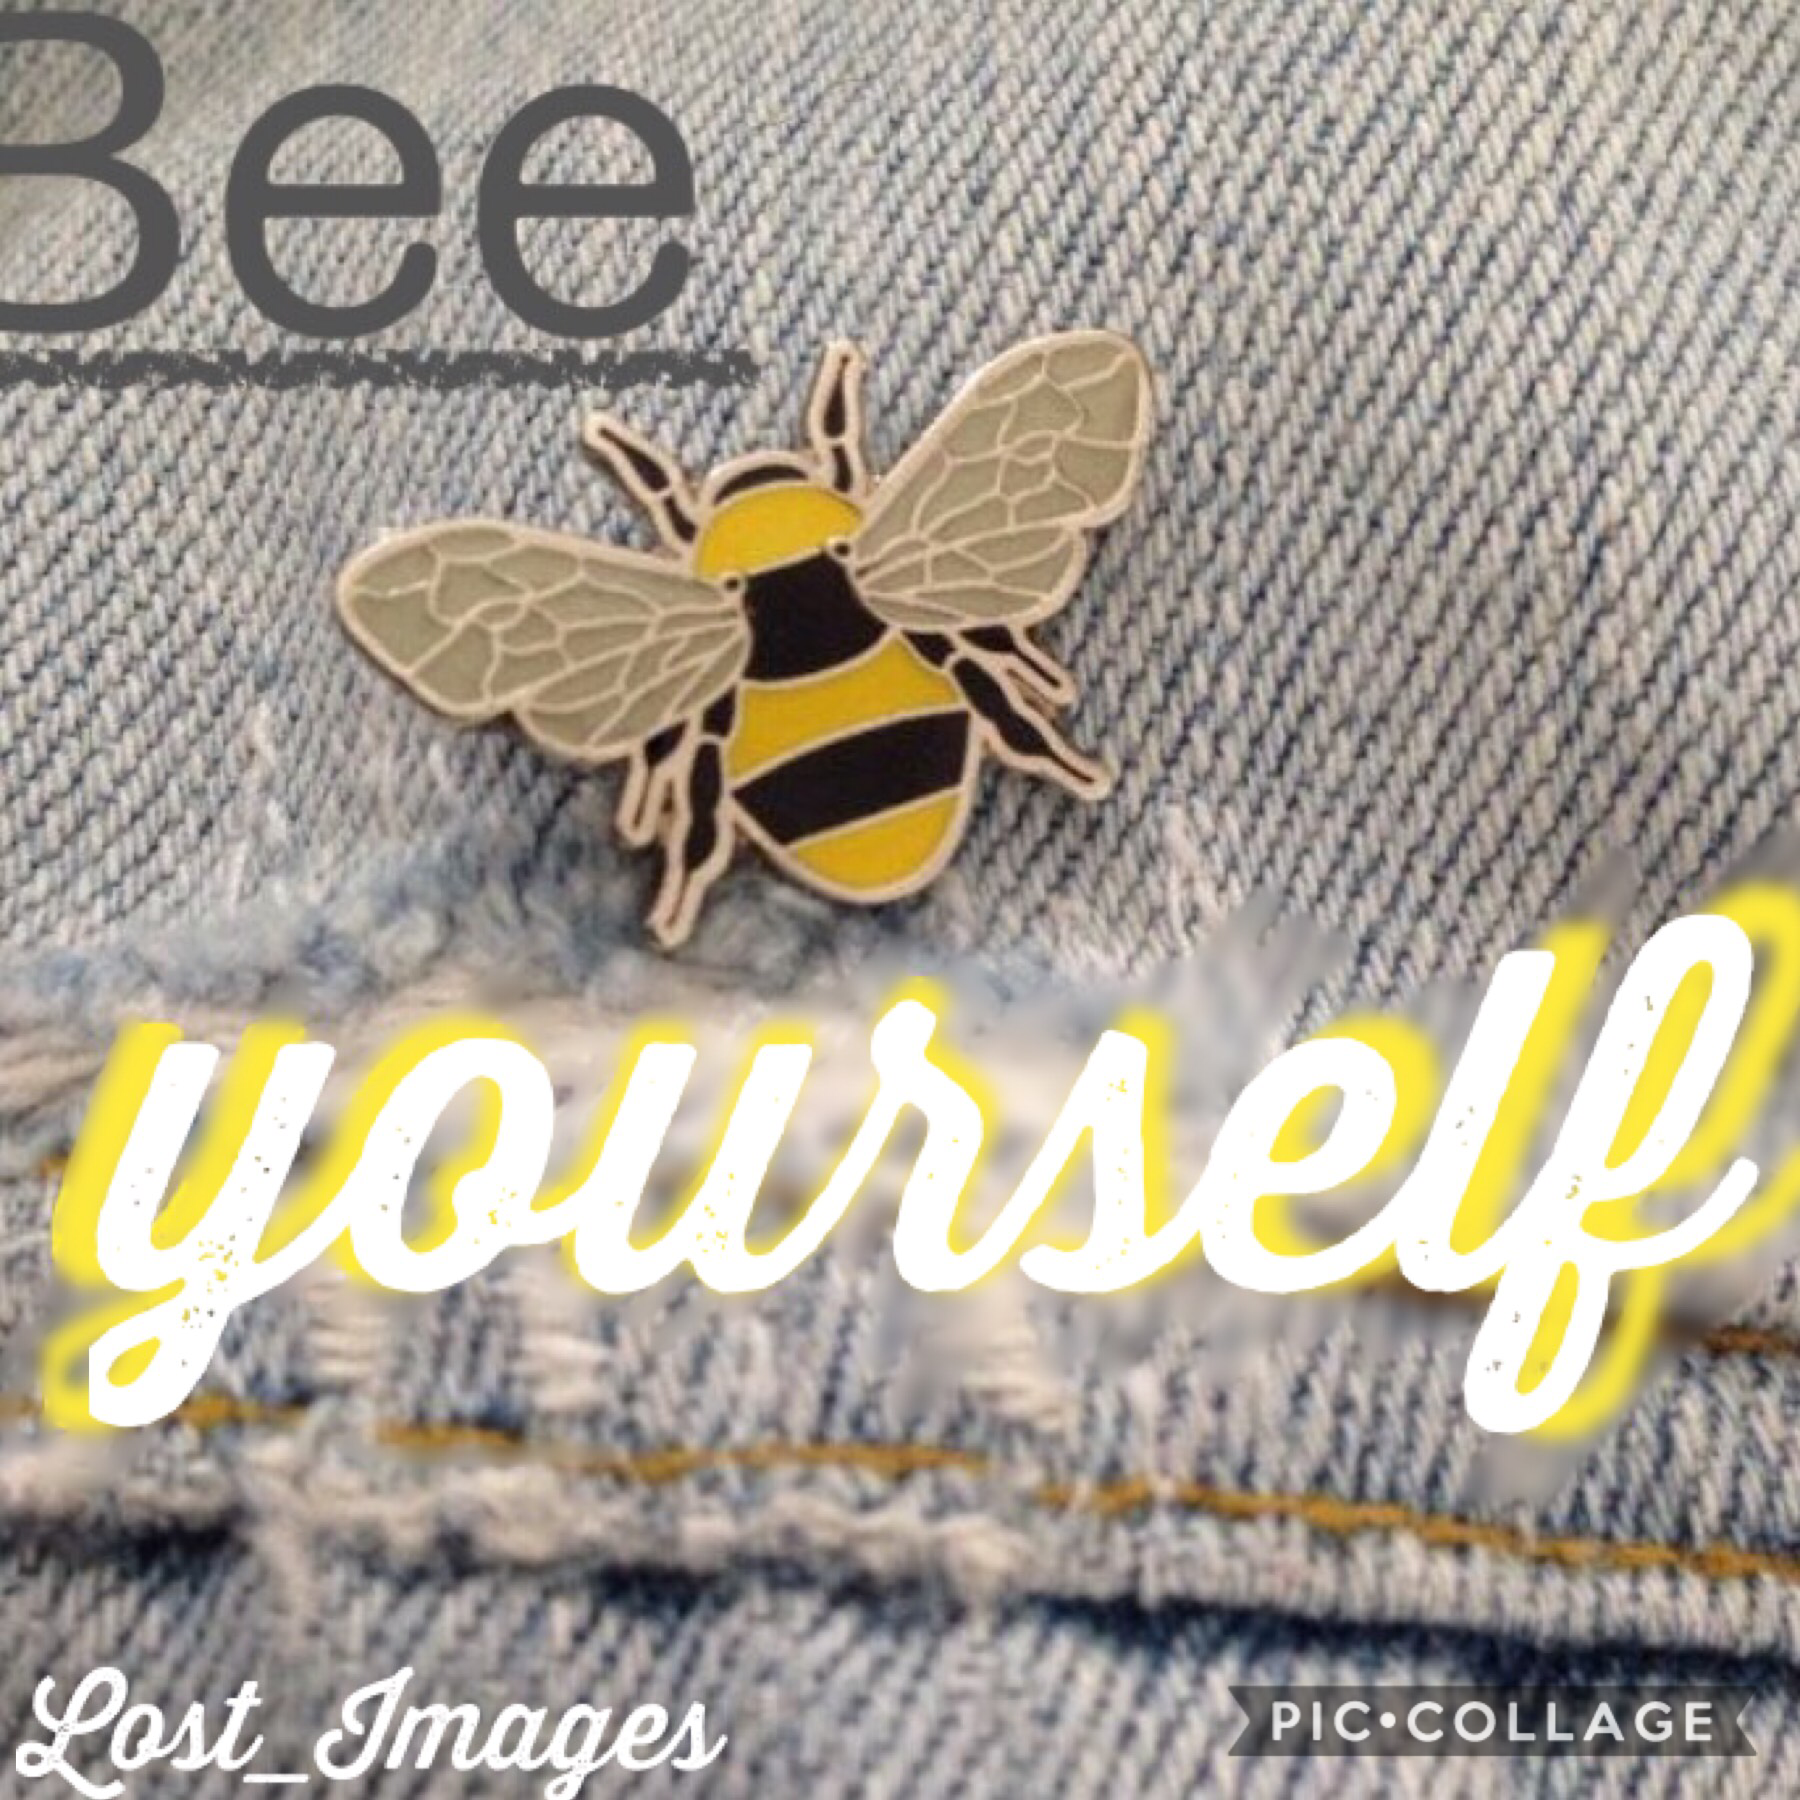 🐝TAP🐝

Remember to “Bee” yourself 💛
Love y’all!
Lost_Images